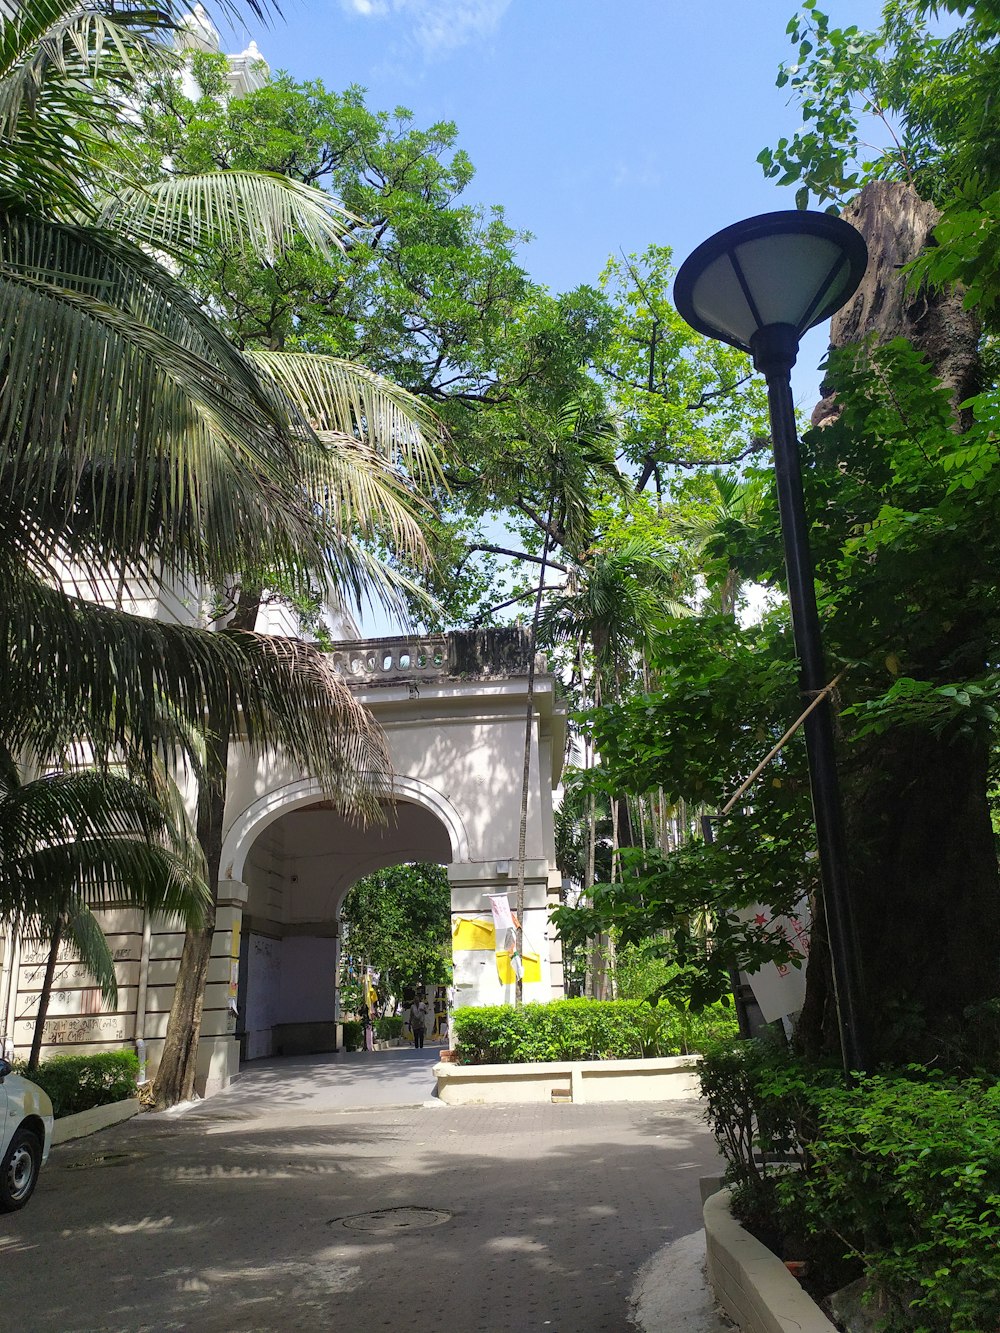 a street with palm trees and a lamp post